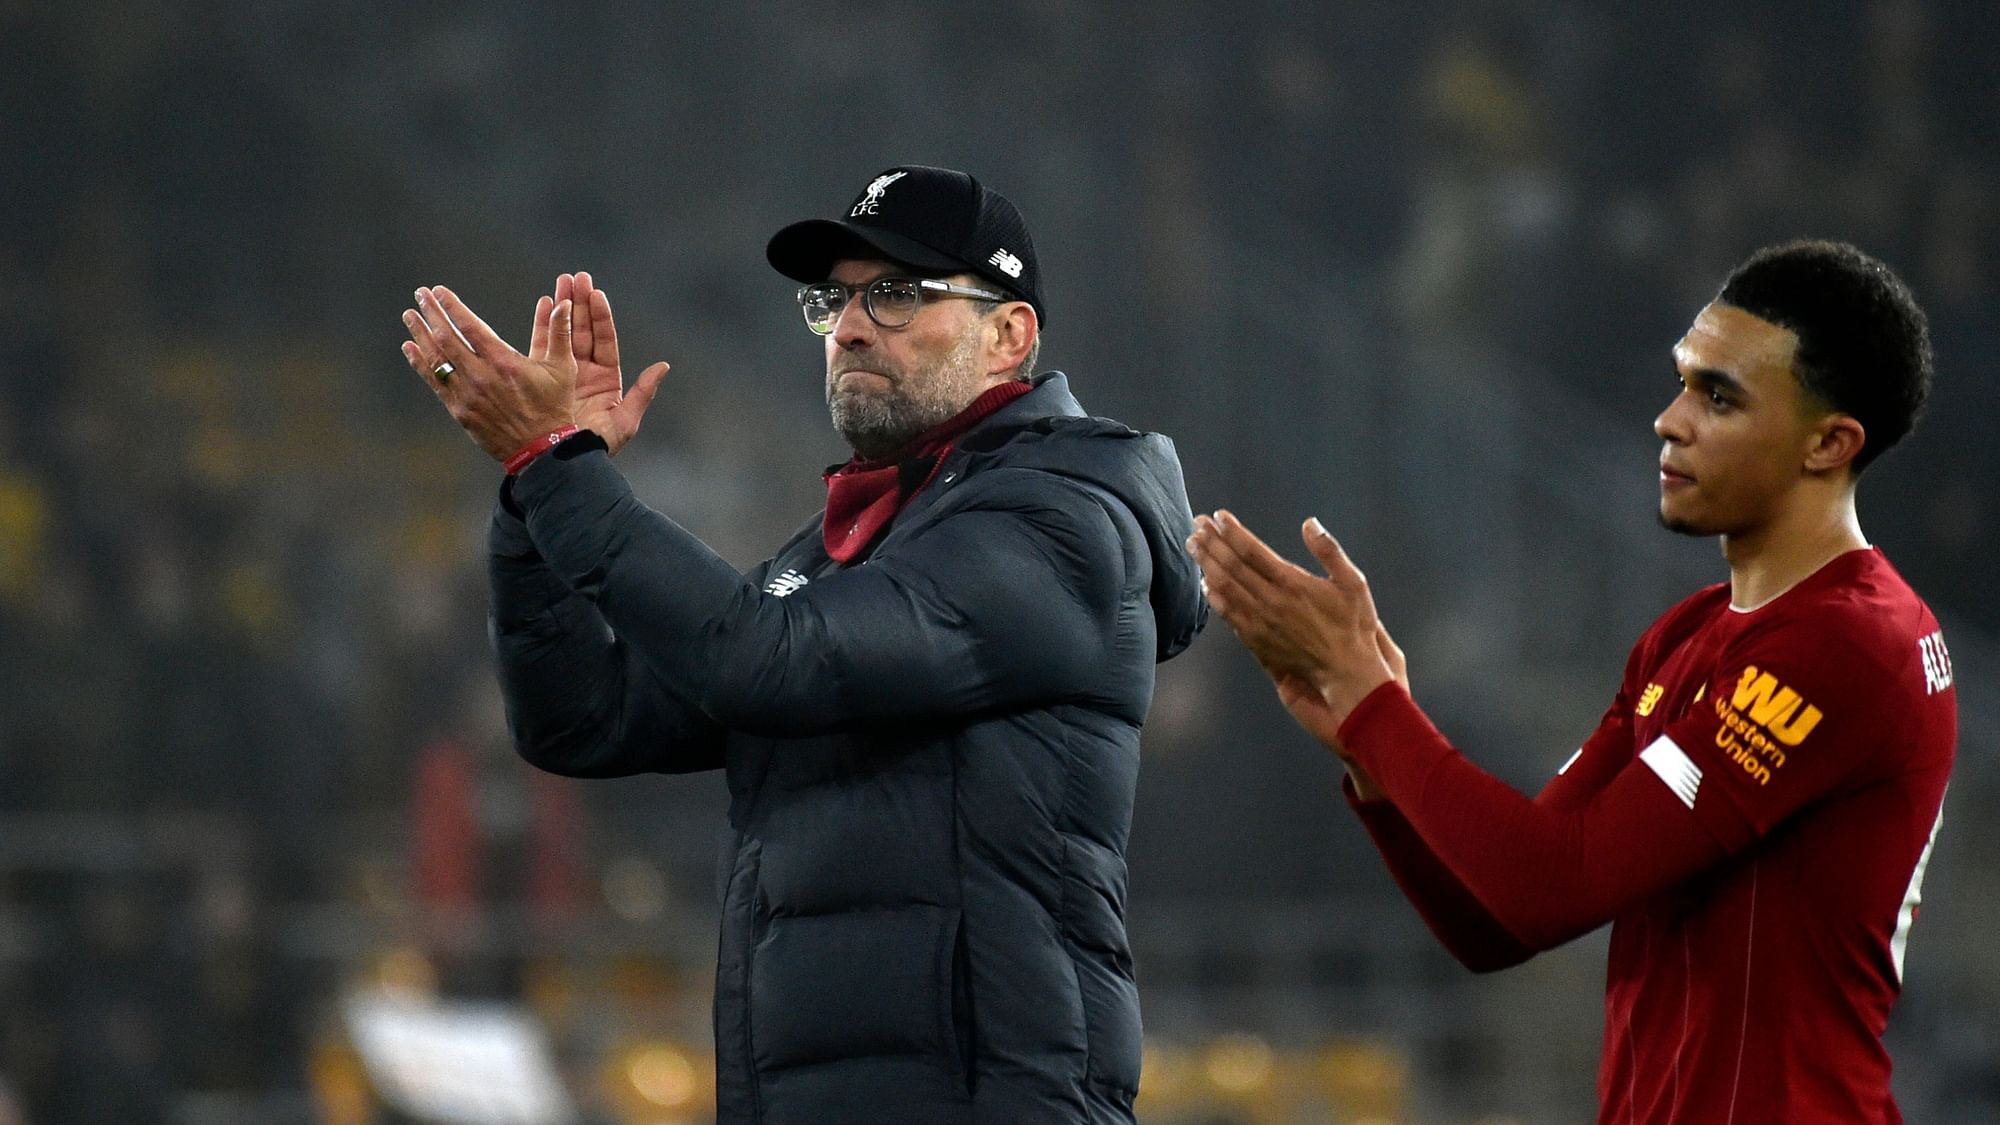 Liverpool’s manager Jurgen Klopp, left, and Liverpool’s Trent Alexander-Arnold greet supporters at the end of the English Premier League soccer match between Wolverhampton Wanderers and Liverpool.